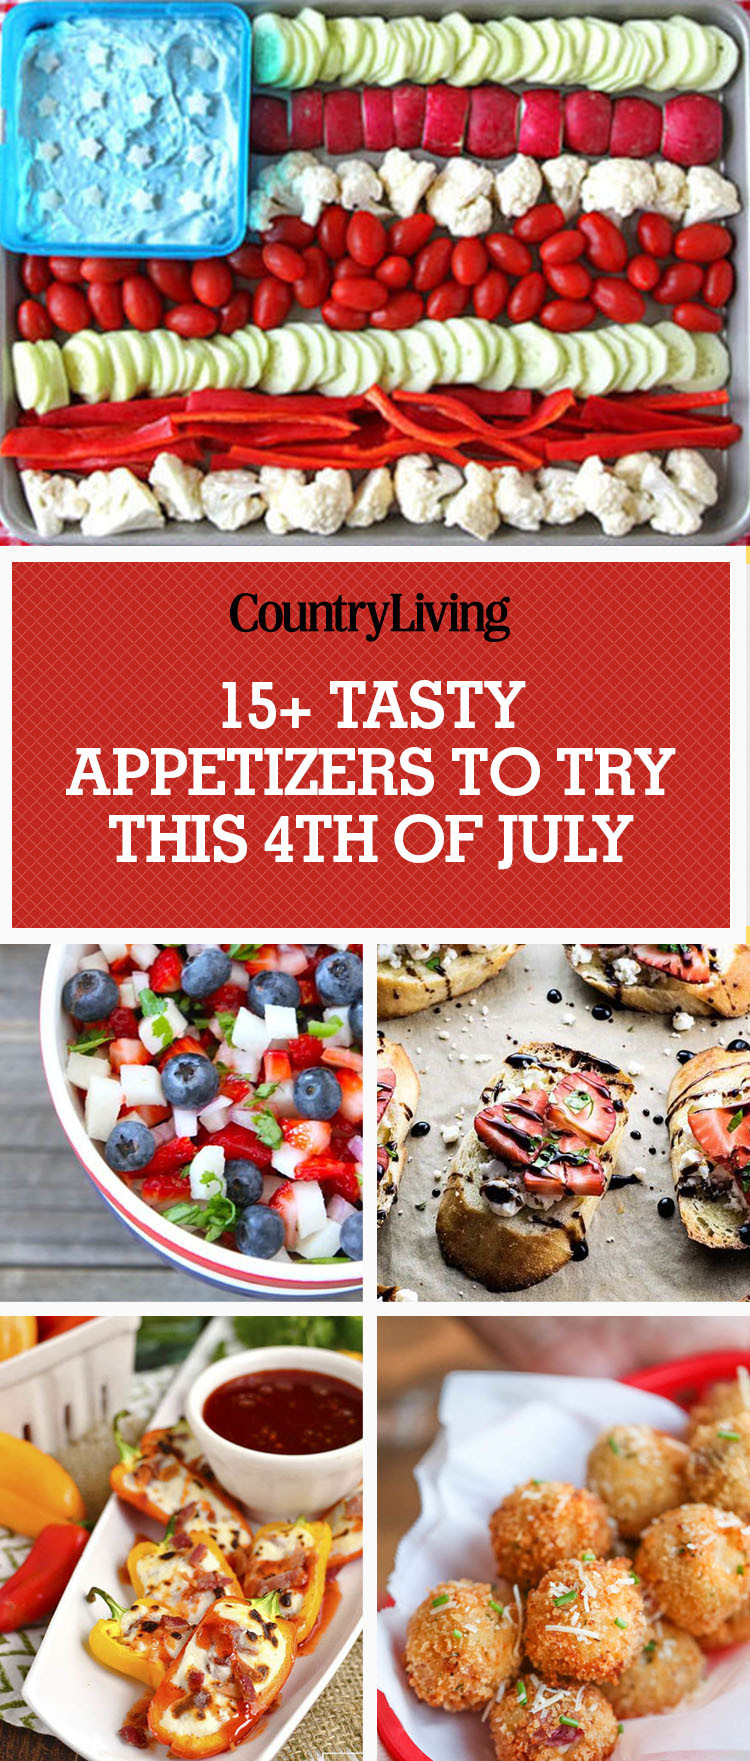 4Th Of July Party Appetizers
 17 Easy 4th of July Appetizers Best Recipes for Fourth